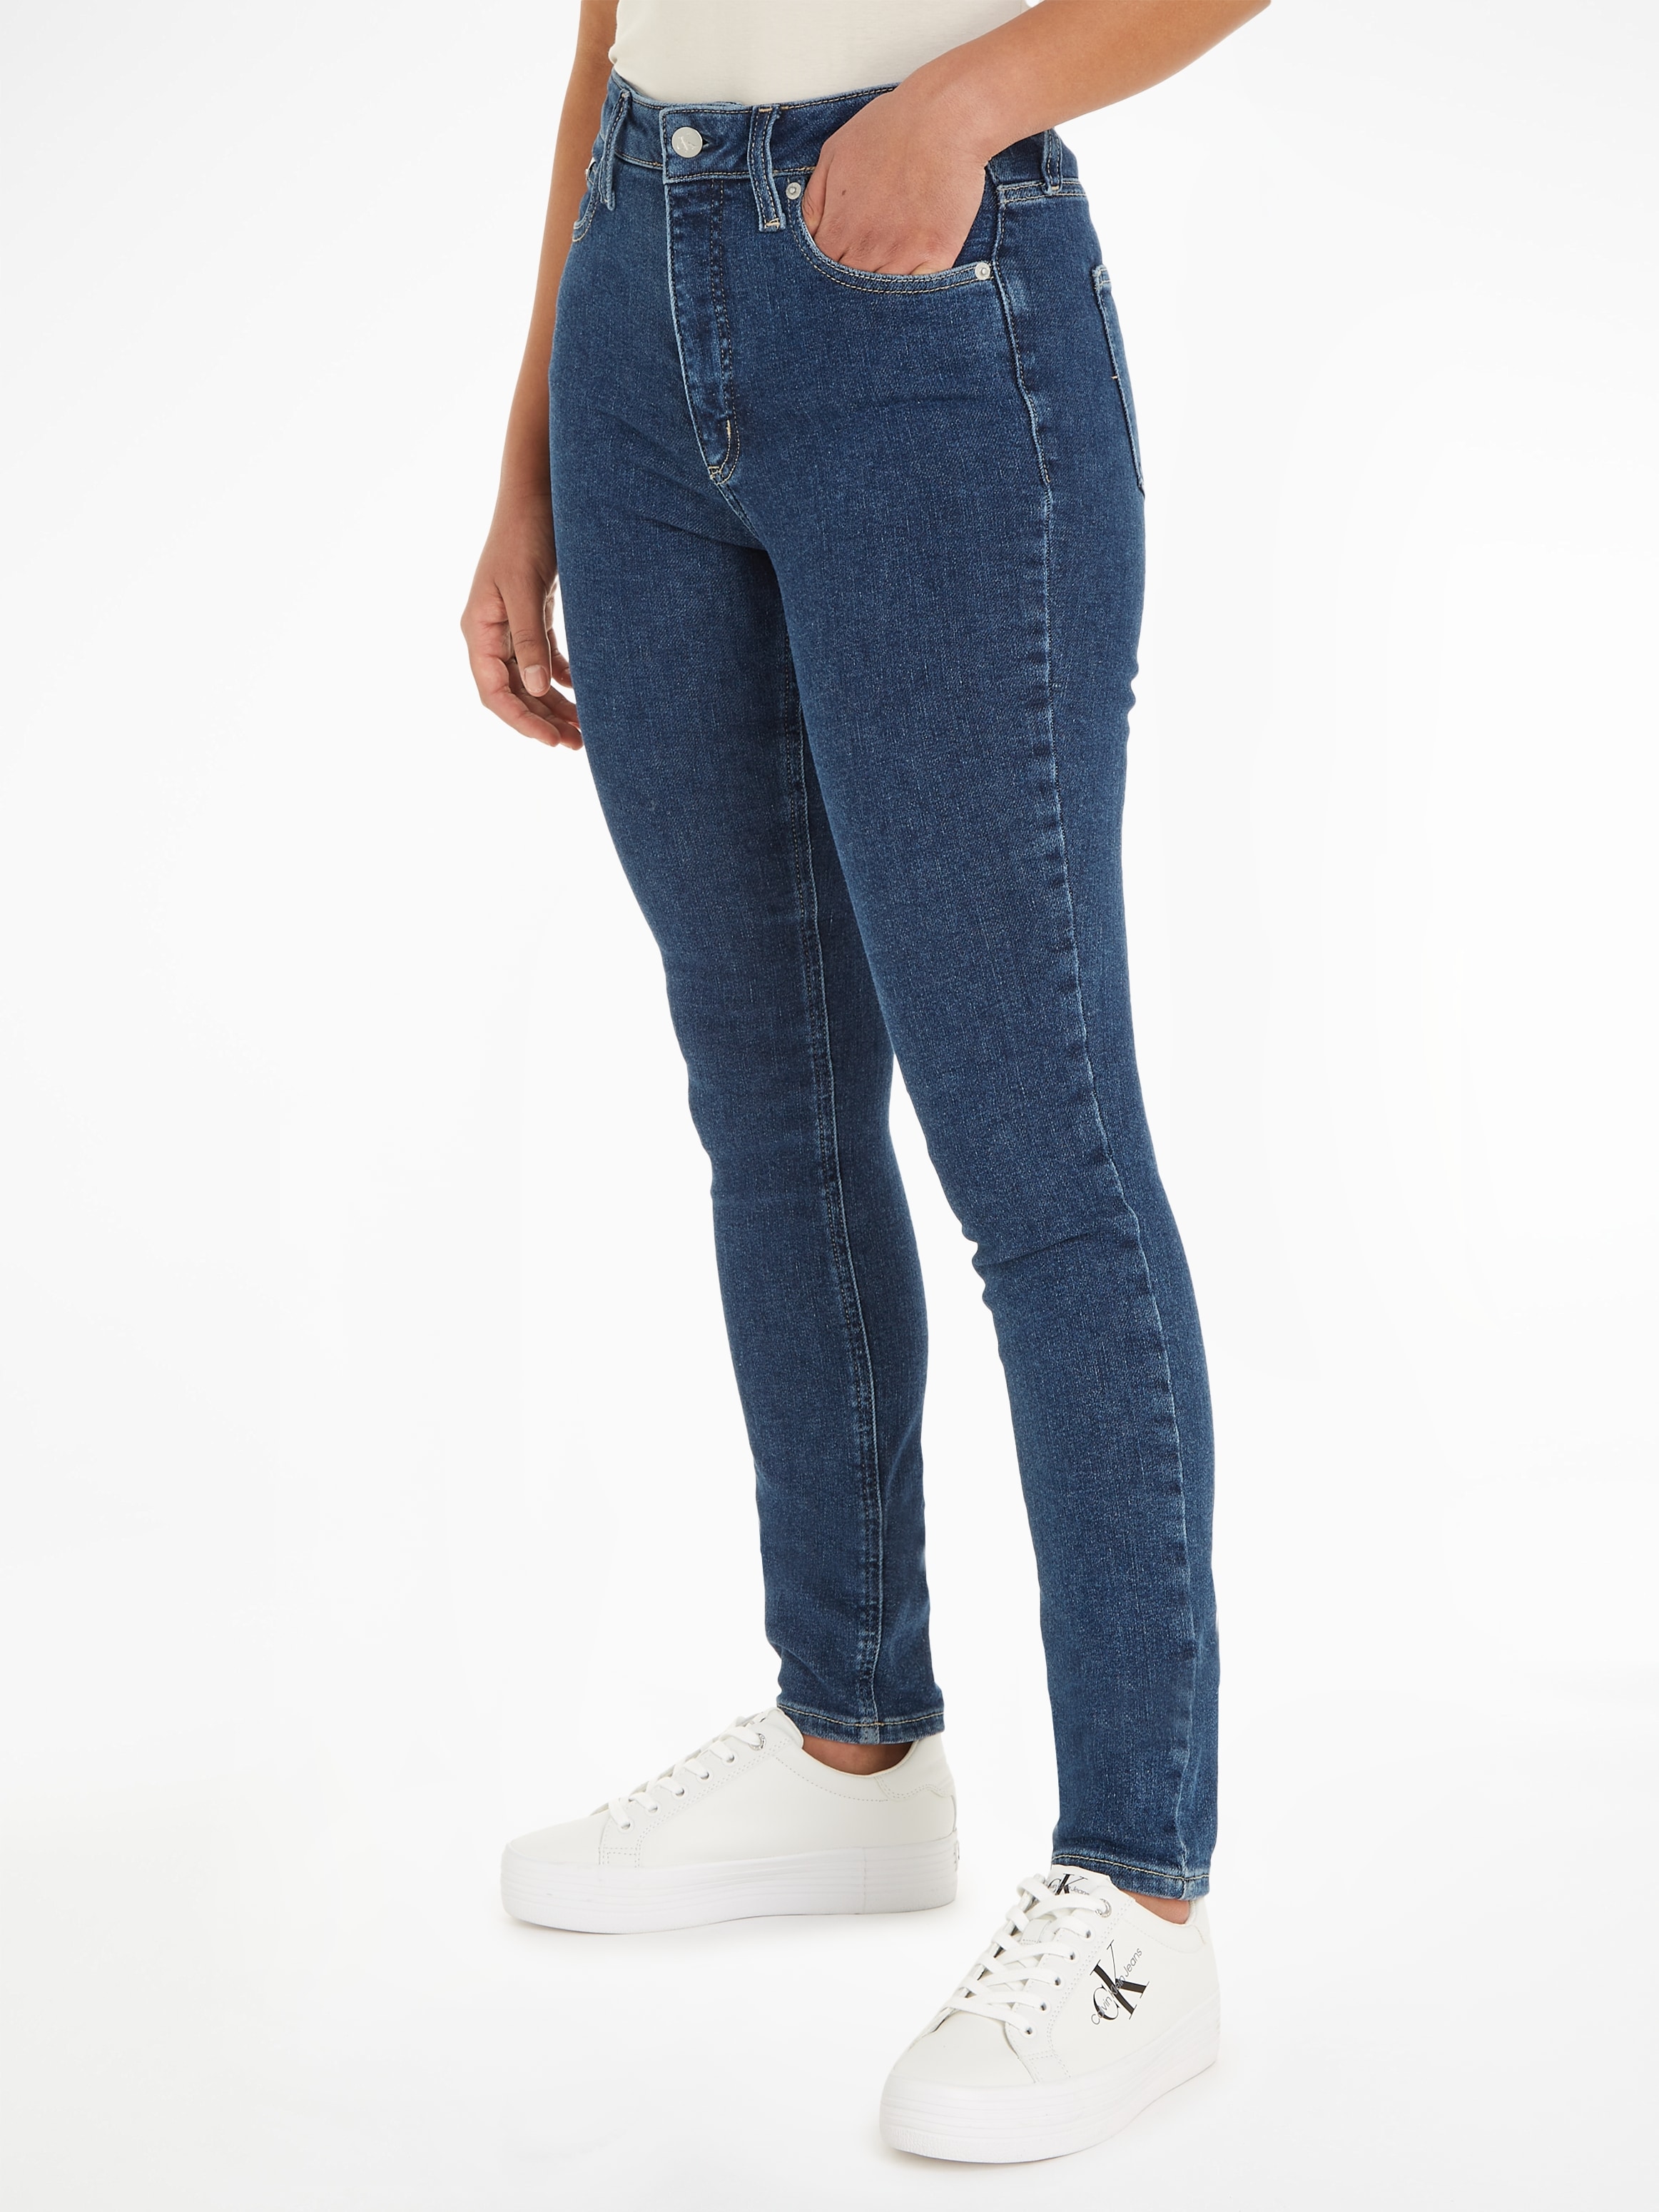 Calvin Klein SKINNY«, RISE bei Skinny-fit-Jeans Jeans 5-Pocket-Style »HIGH im kaufen OTTO